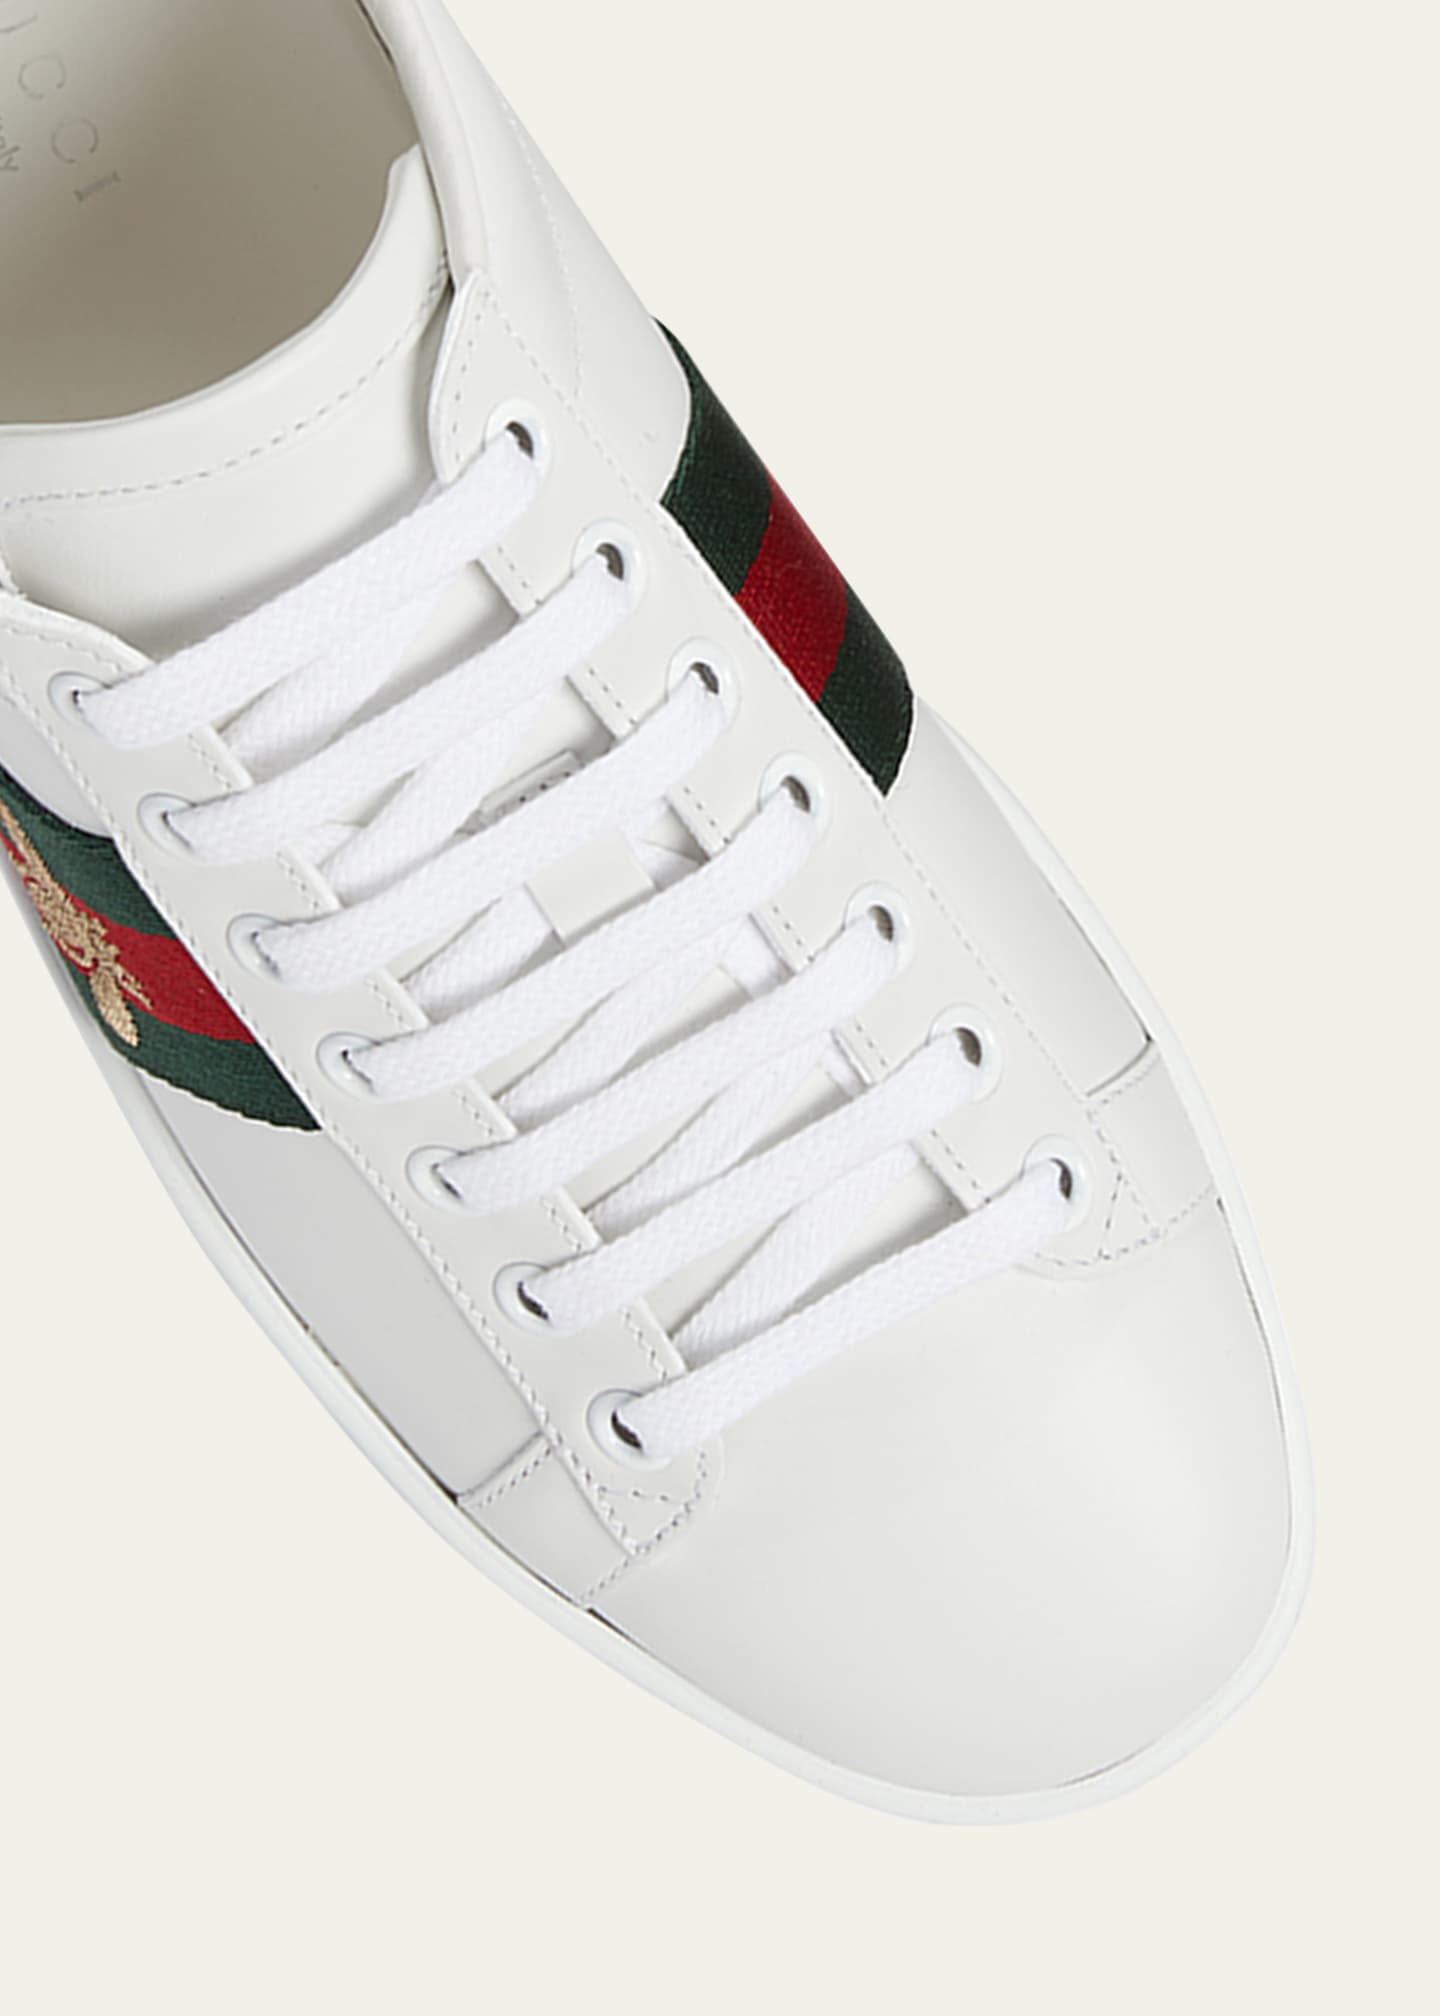 Gucci New Ace Bee Sneakers Image 3 of 3